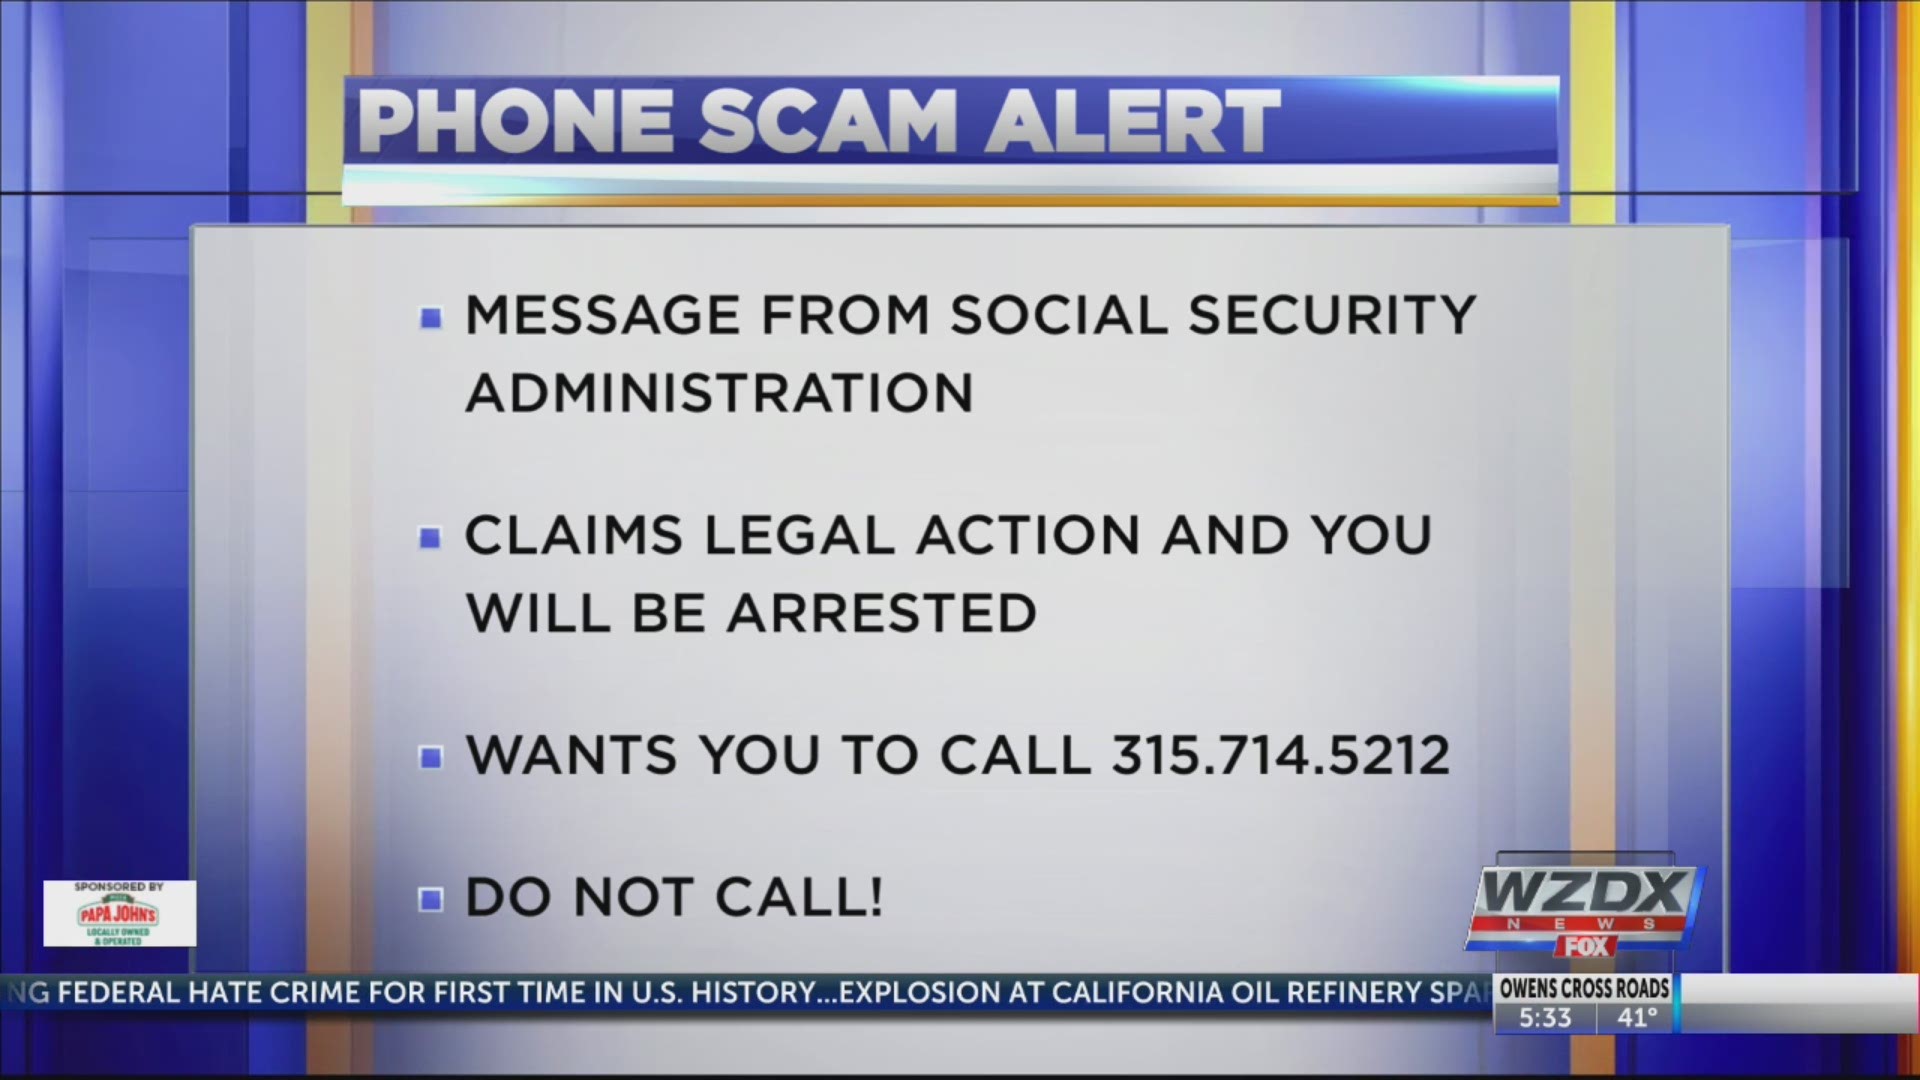 The scam call claims legal action has been filed on your social security number.